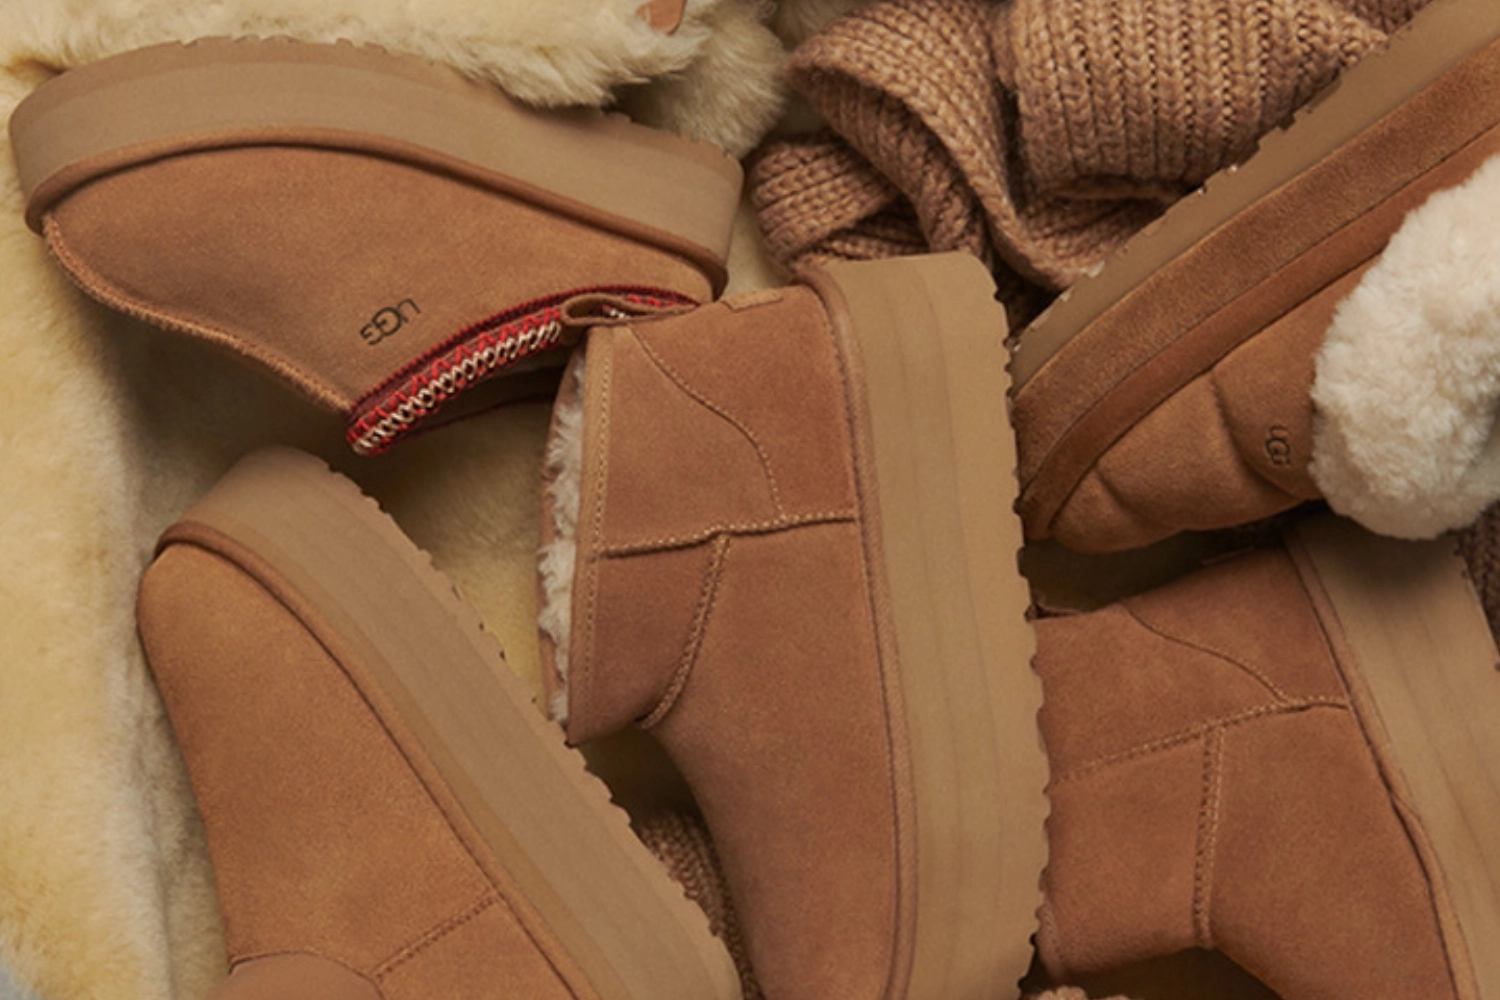 These popular UGG boots are a must-have for this winter season